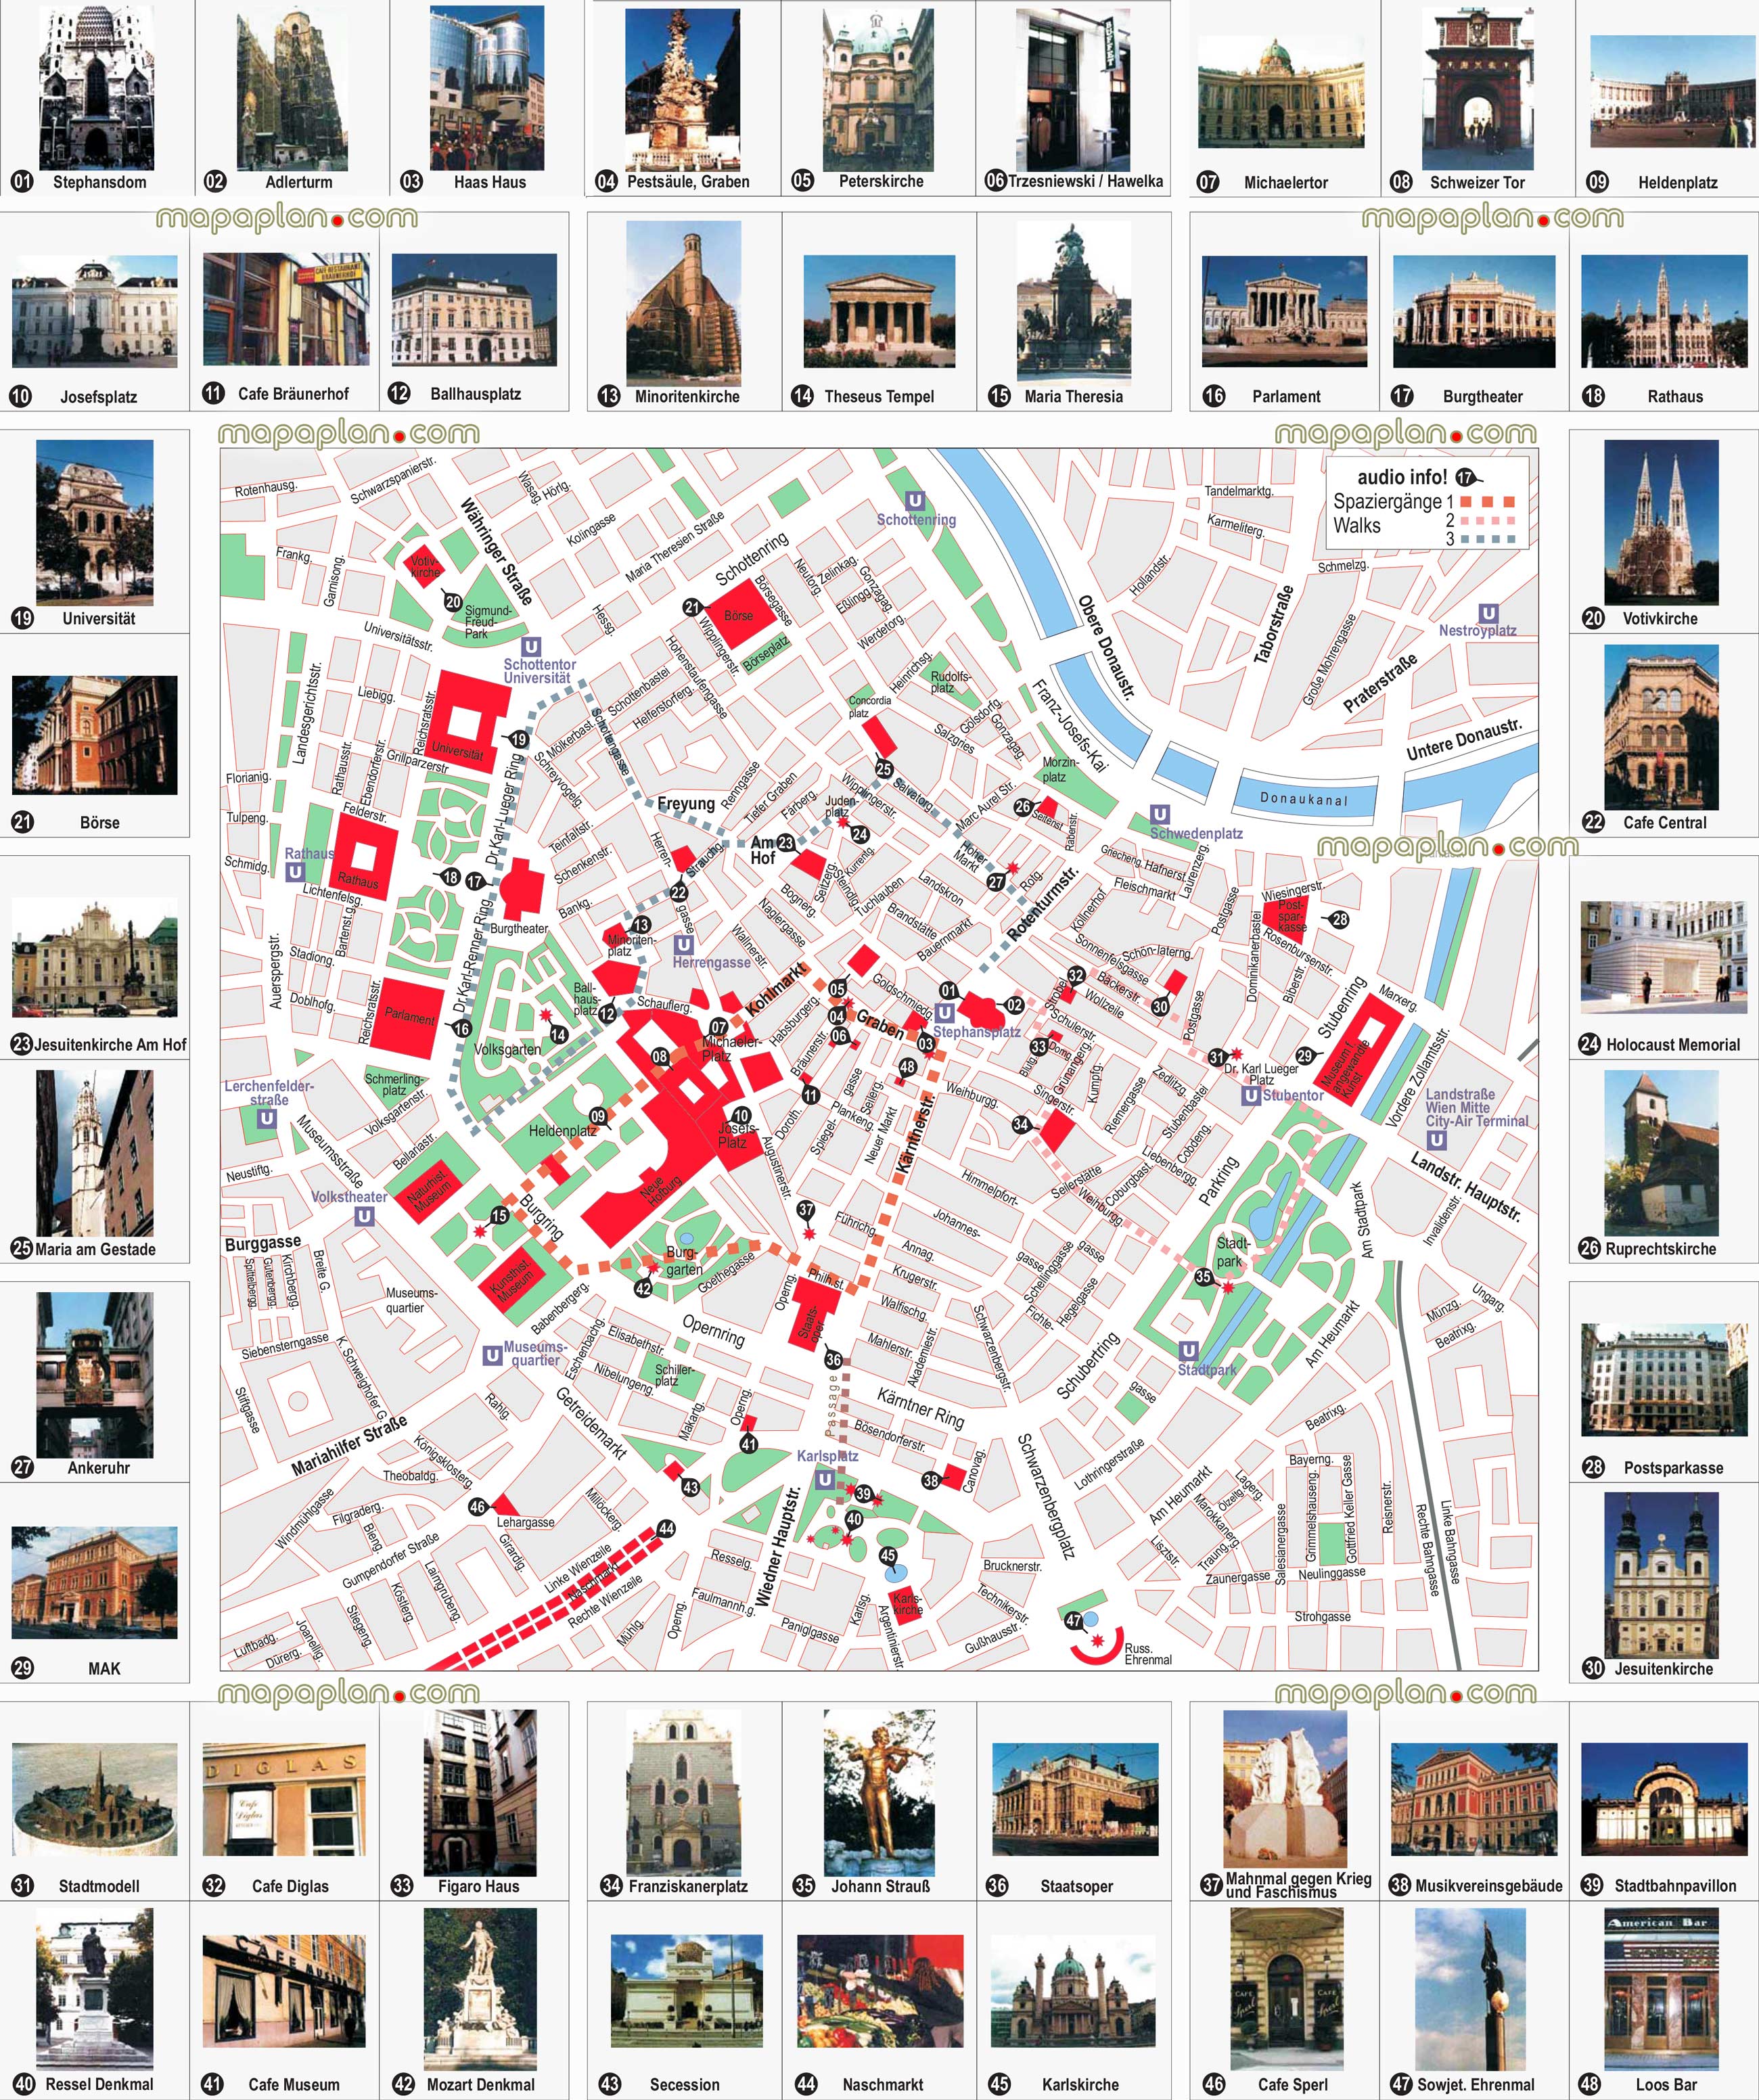 vienna city centre free travel guide must see sights best destinations visits Vienna Top tourist attractions map